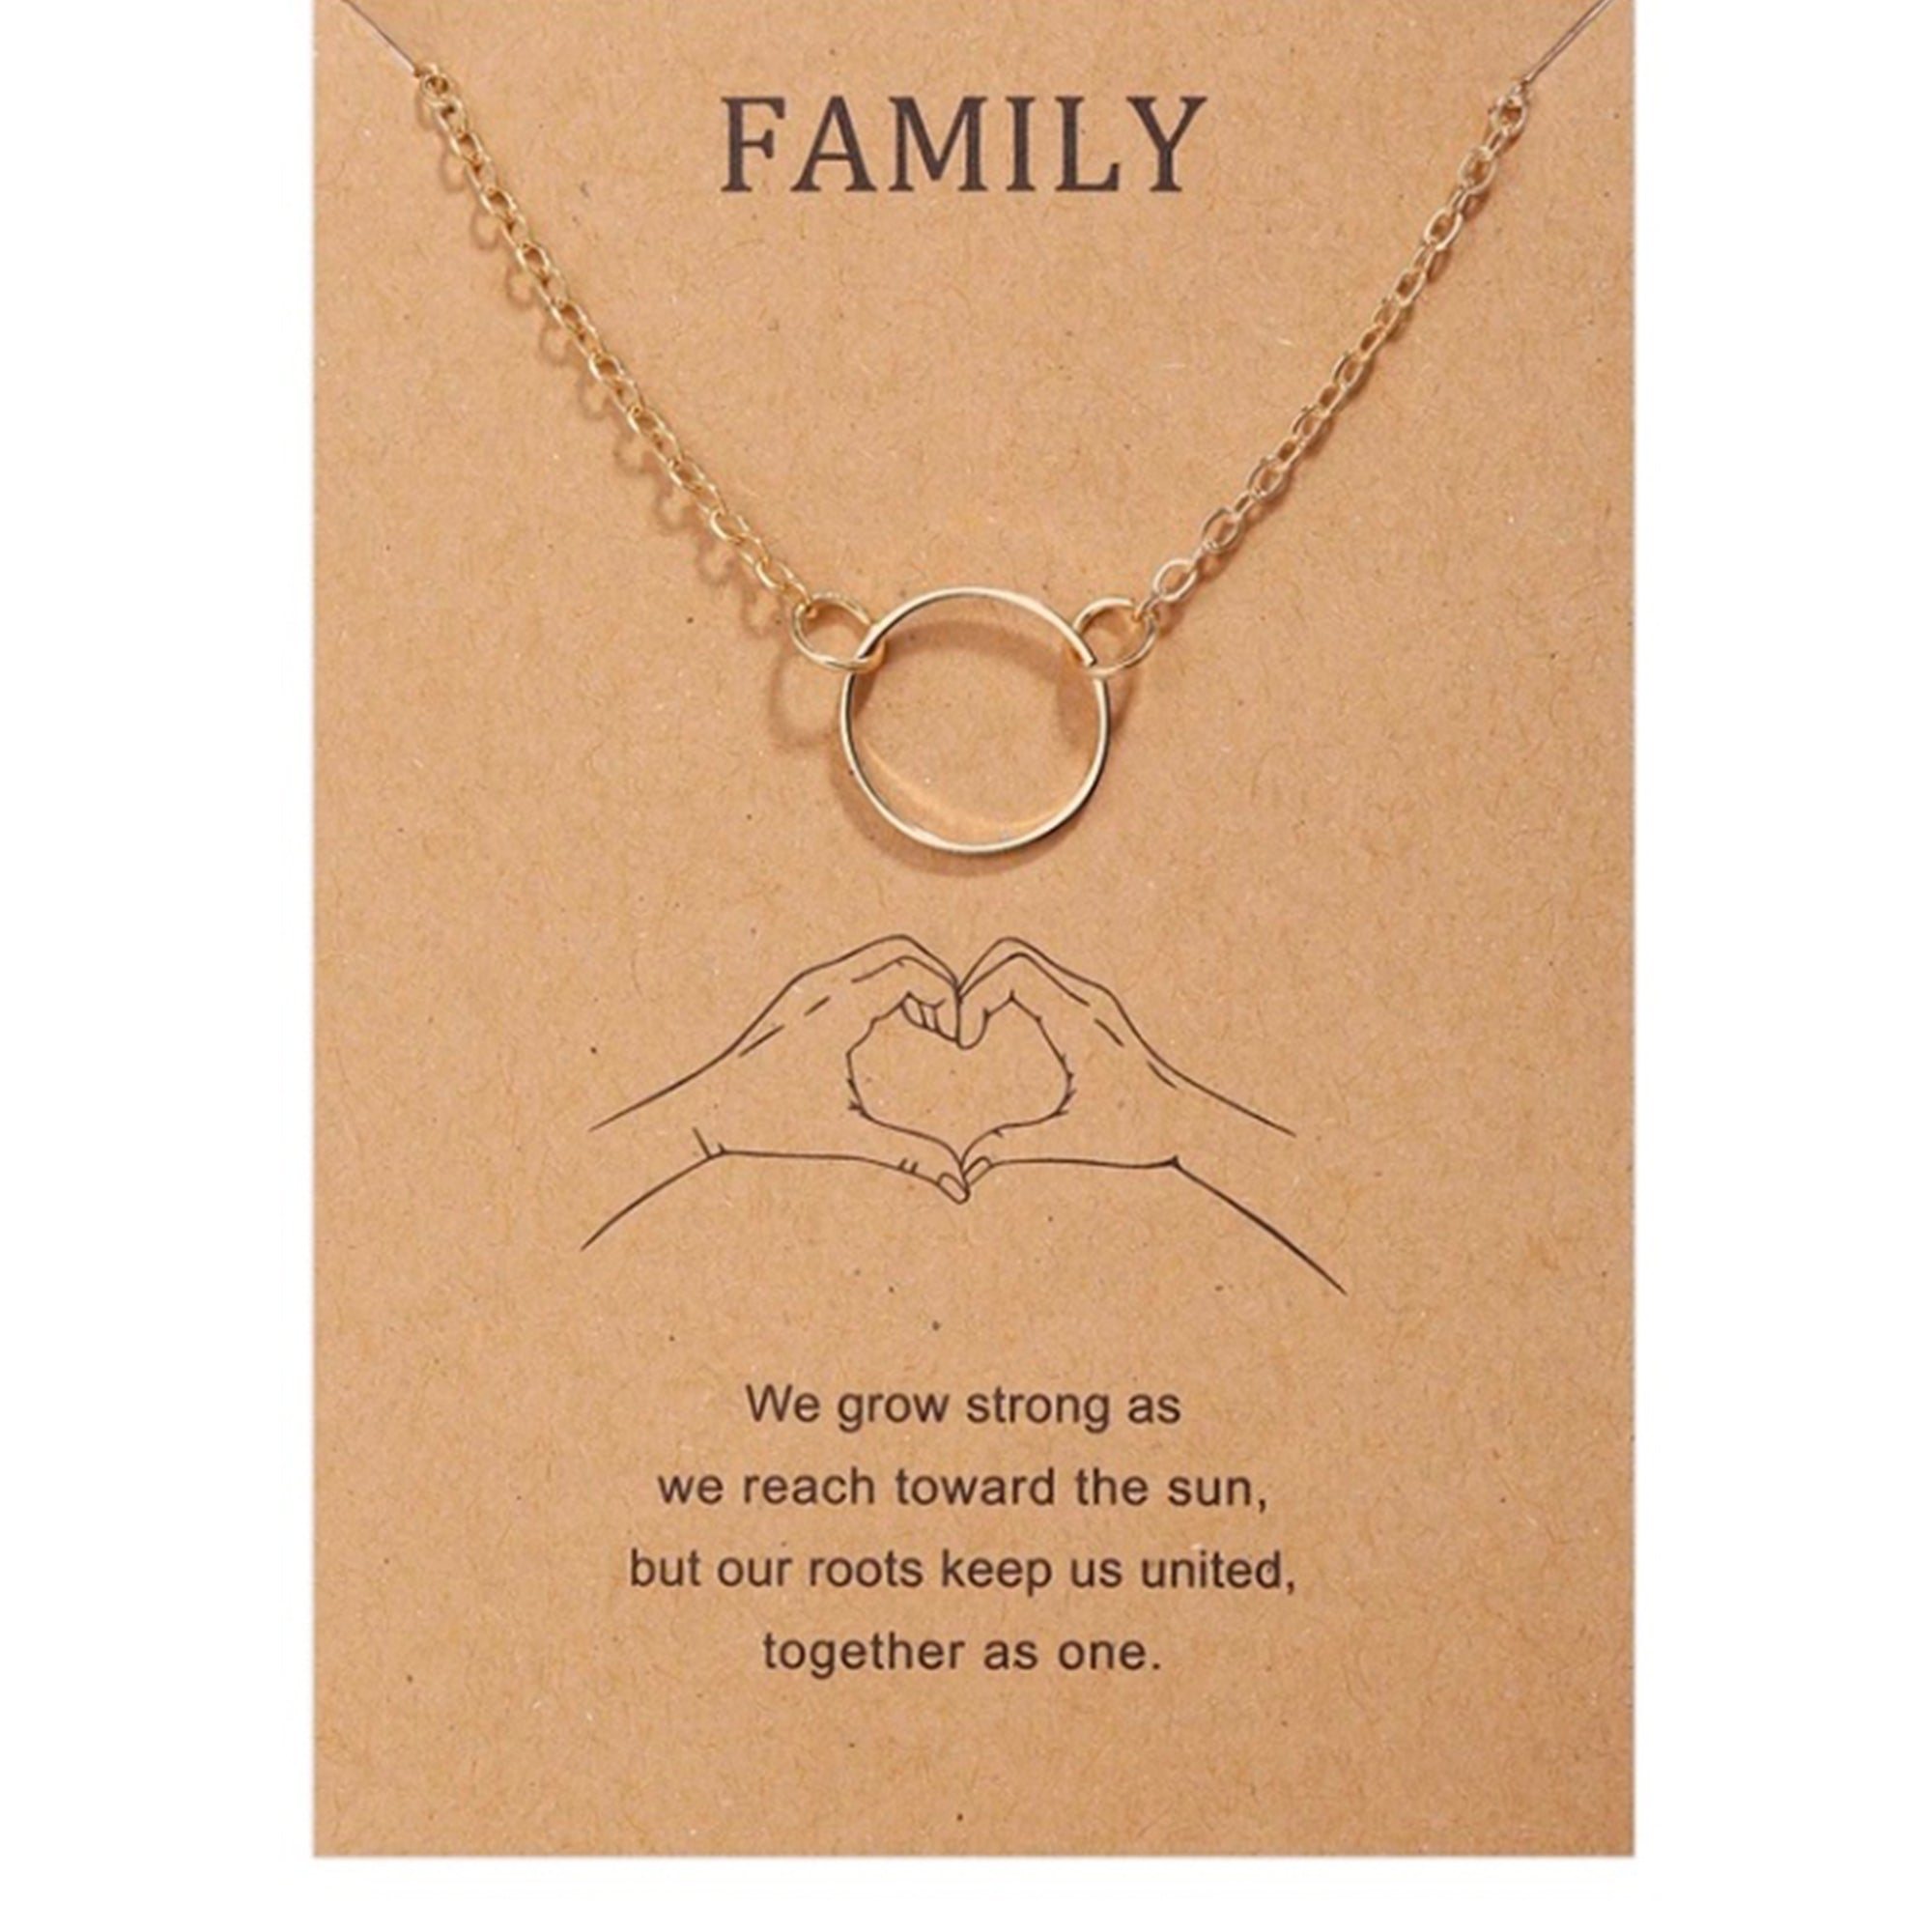 Engraved Family Heart Necklace in 18k Gold Plating over 925 Sterling Silver  | JOYAMO - Personalized Jewelry